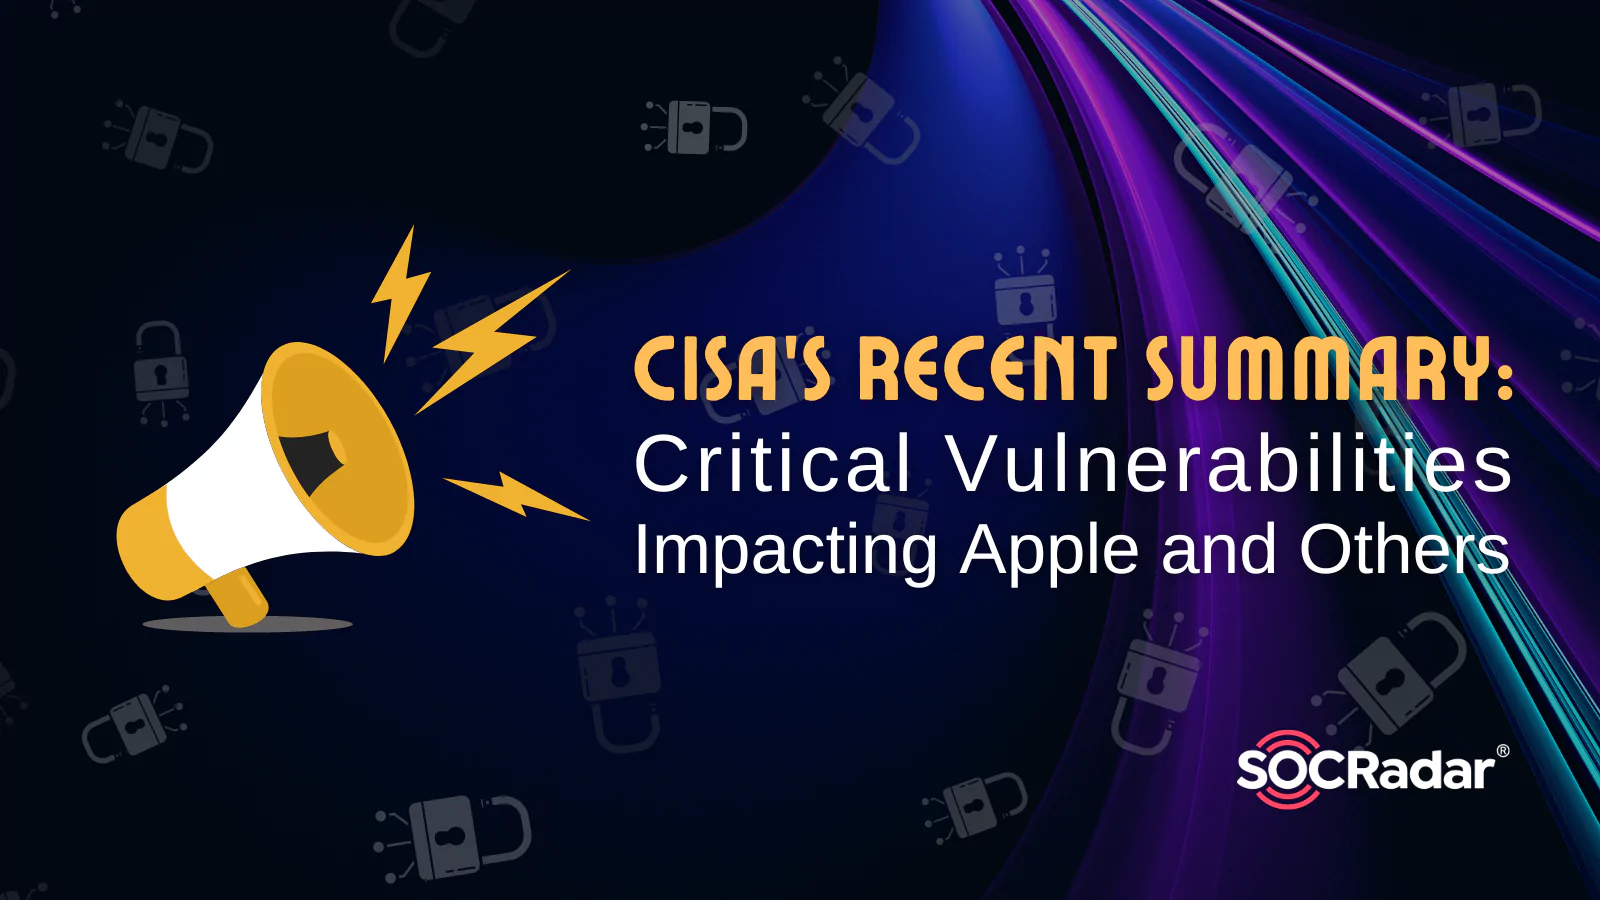 SOCRadar® Cyber Intelligence Inc. | CISA's Recent Summary: Critical Vulnerabilities Impacting Apple and Other Prominent Entities